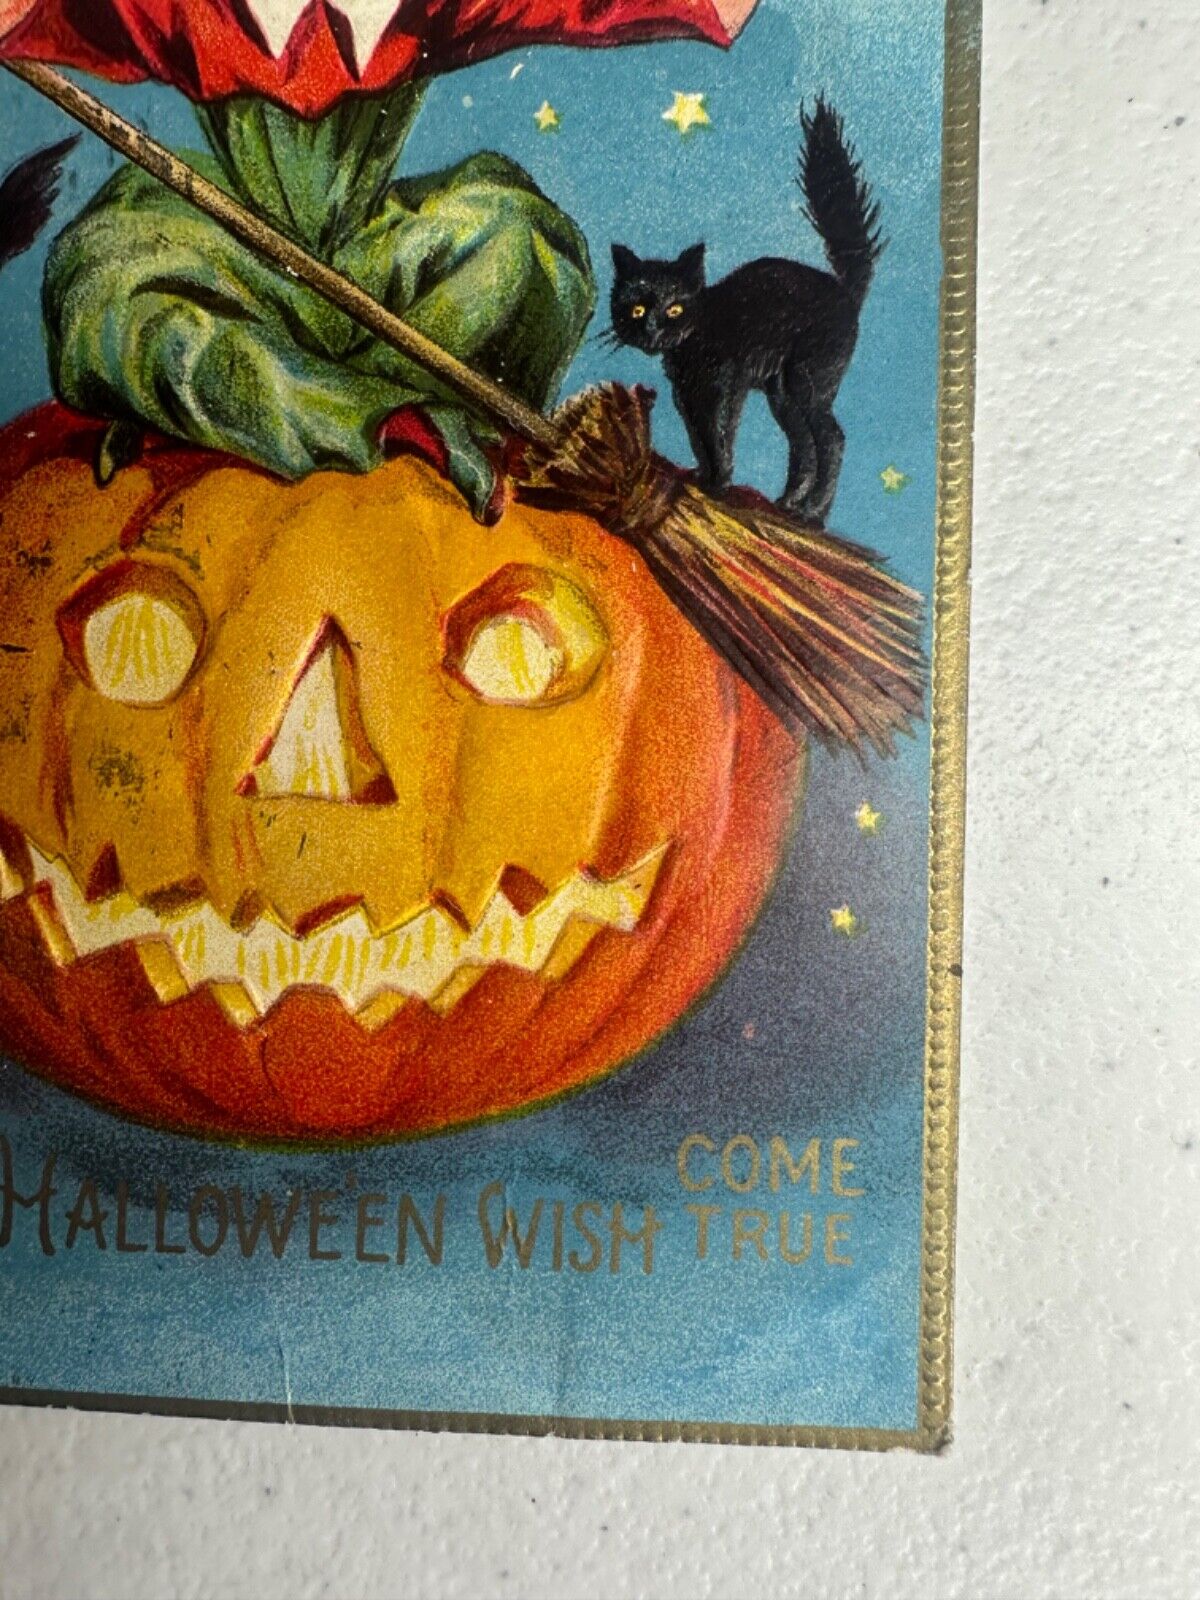 Rare 1911 Antique Halloween Postcard - Embossed Witch, Pumpkin, Bat & Black Cat - Collectible from Iowa - TreasuTiques